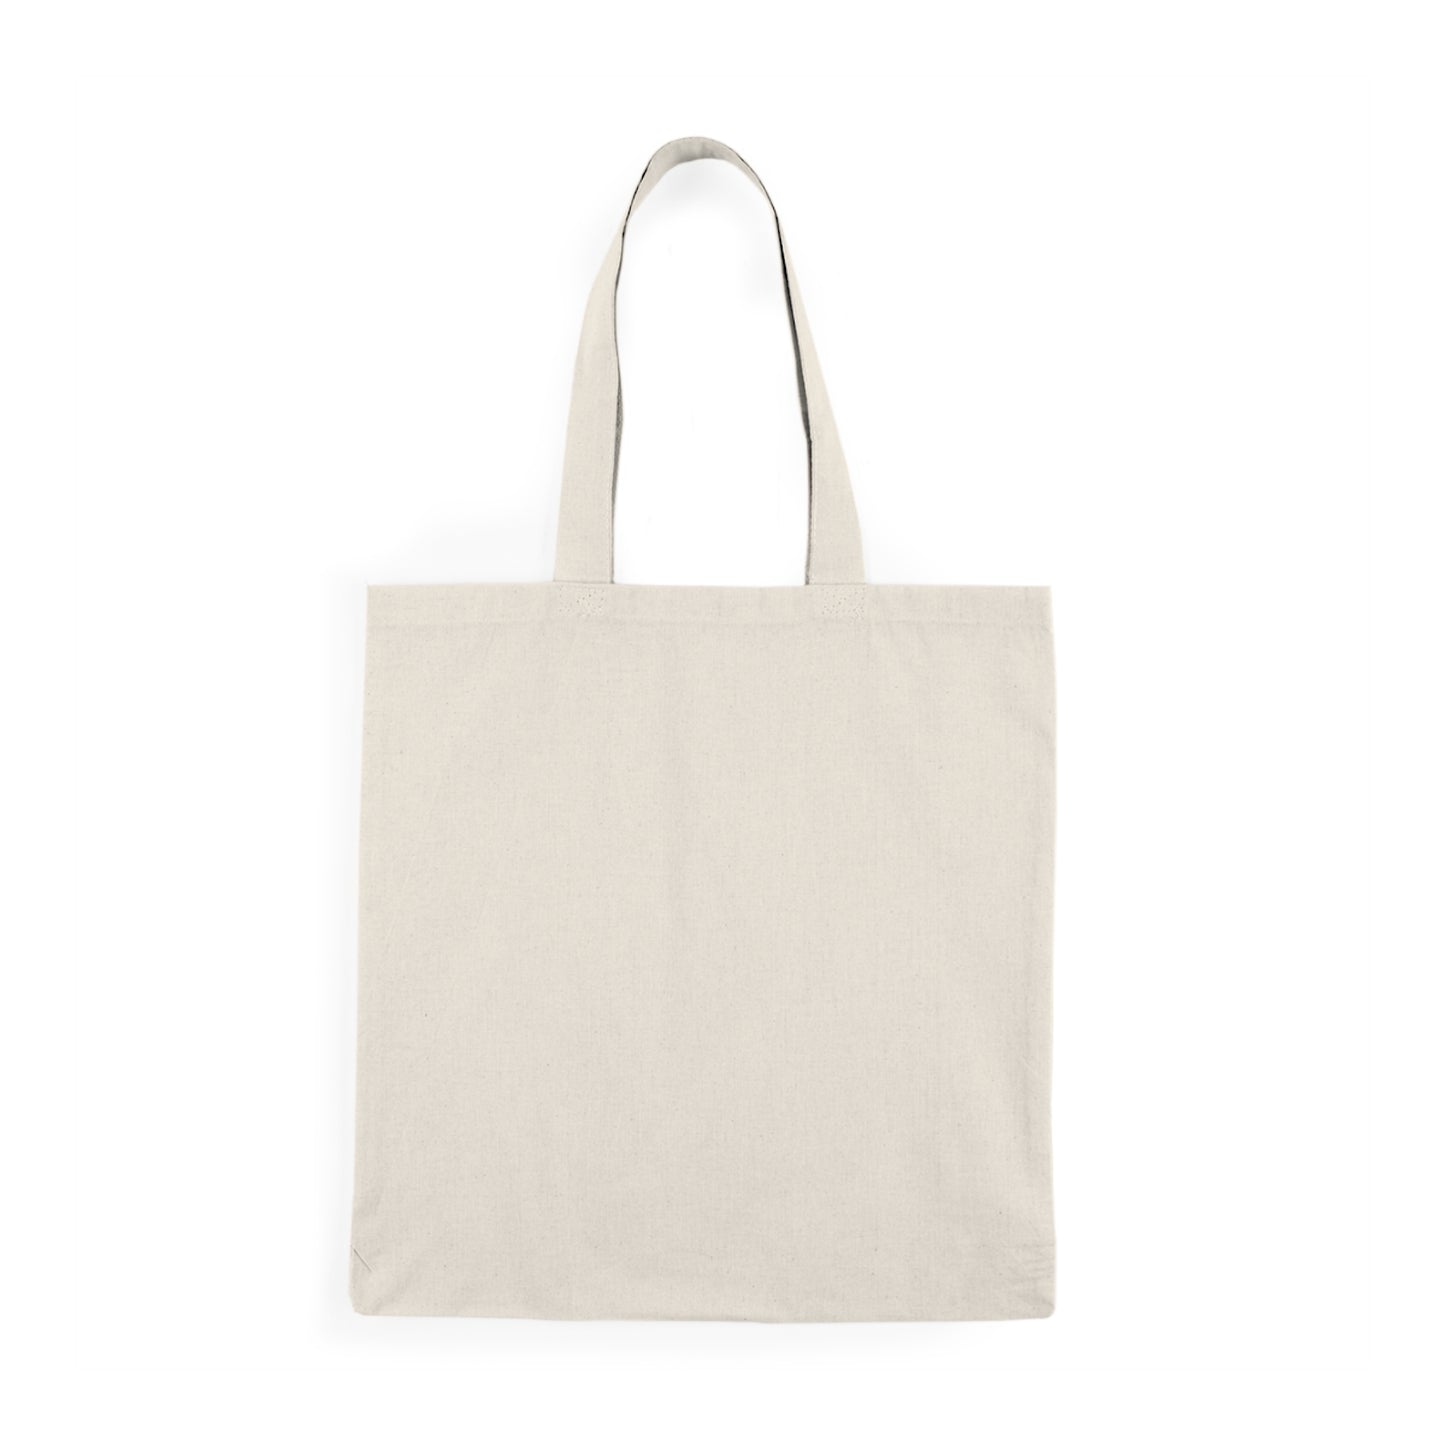 "Girls Support Girls" Tote Bag